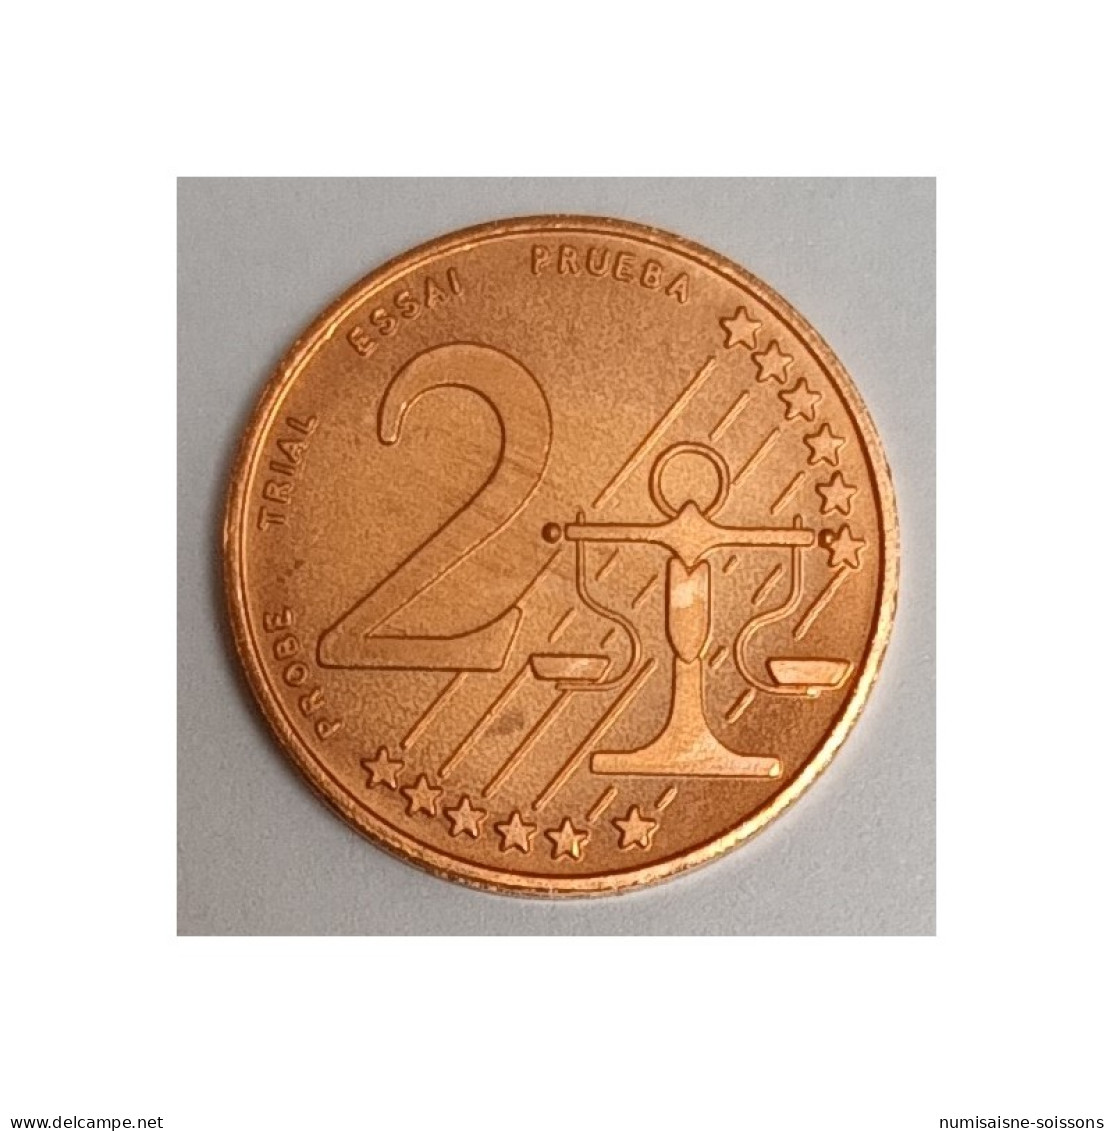 POLOGNE - 2 CENT 2004 - PROTOTYPE - FDC - Privatentwürfe